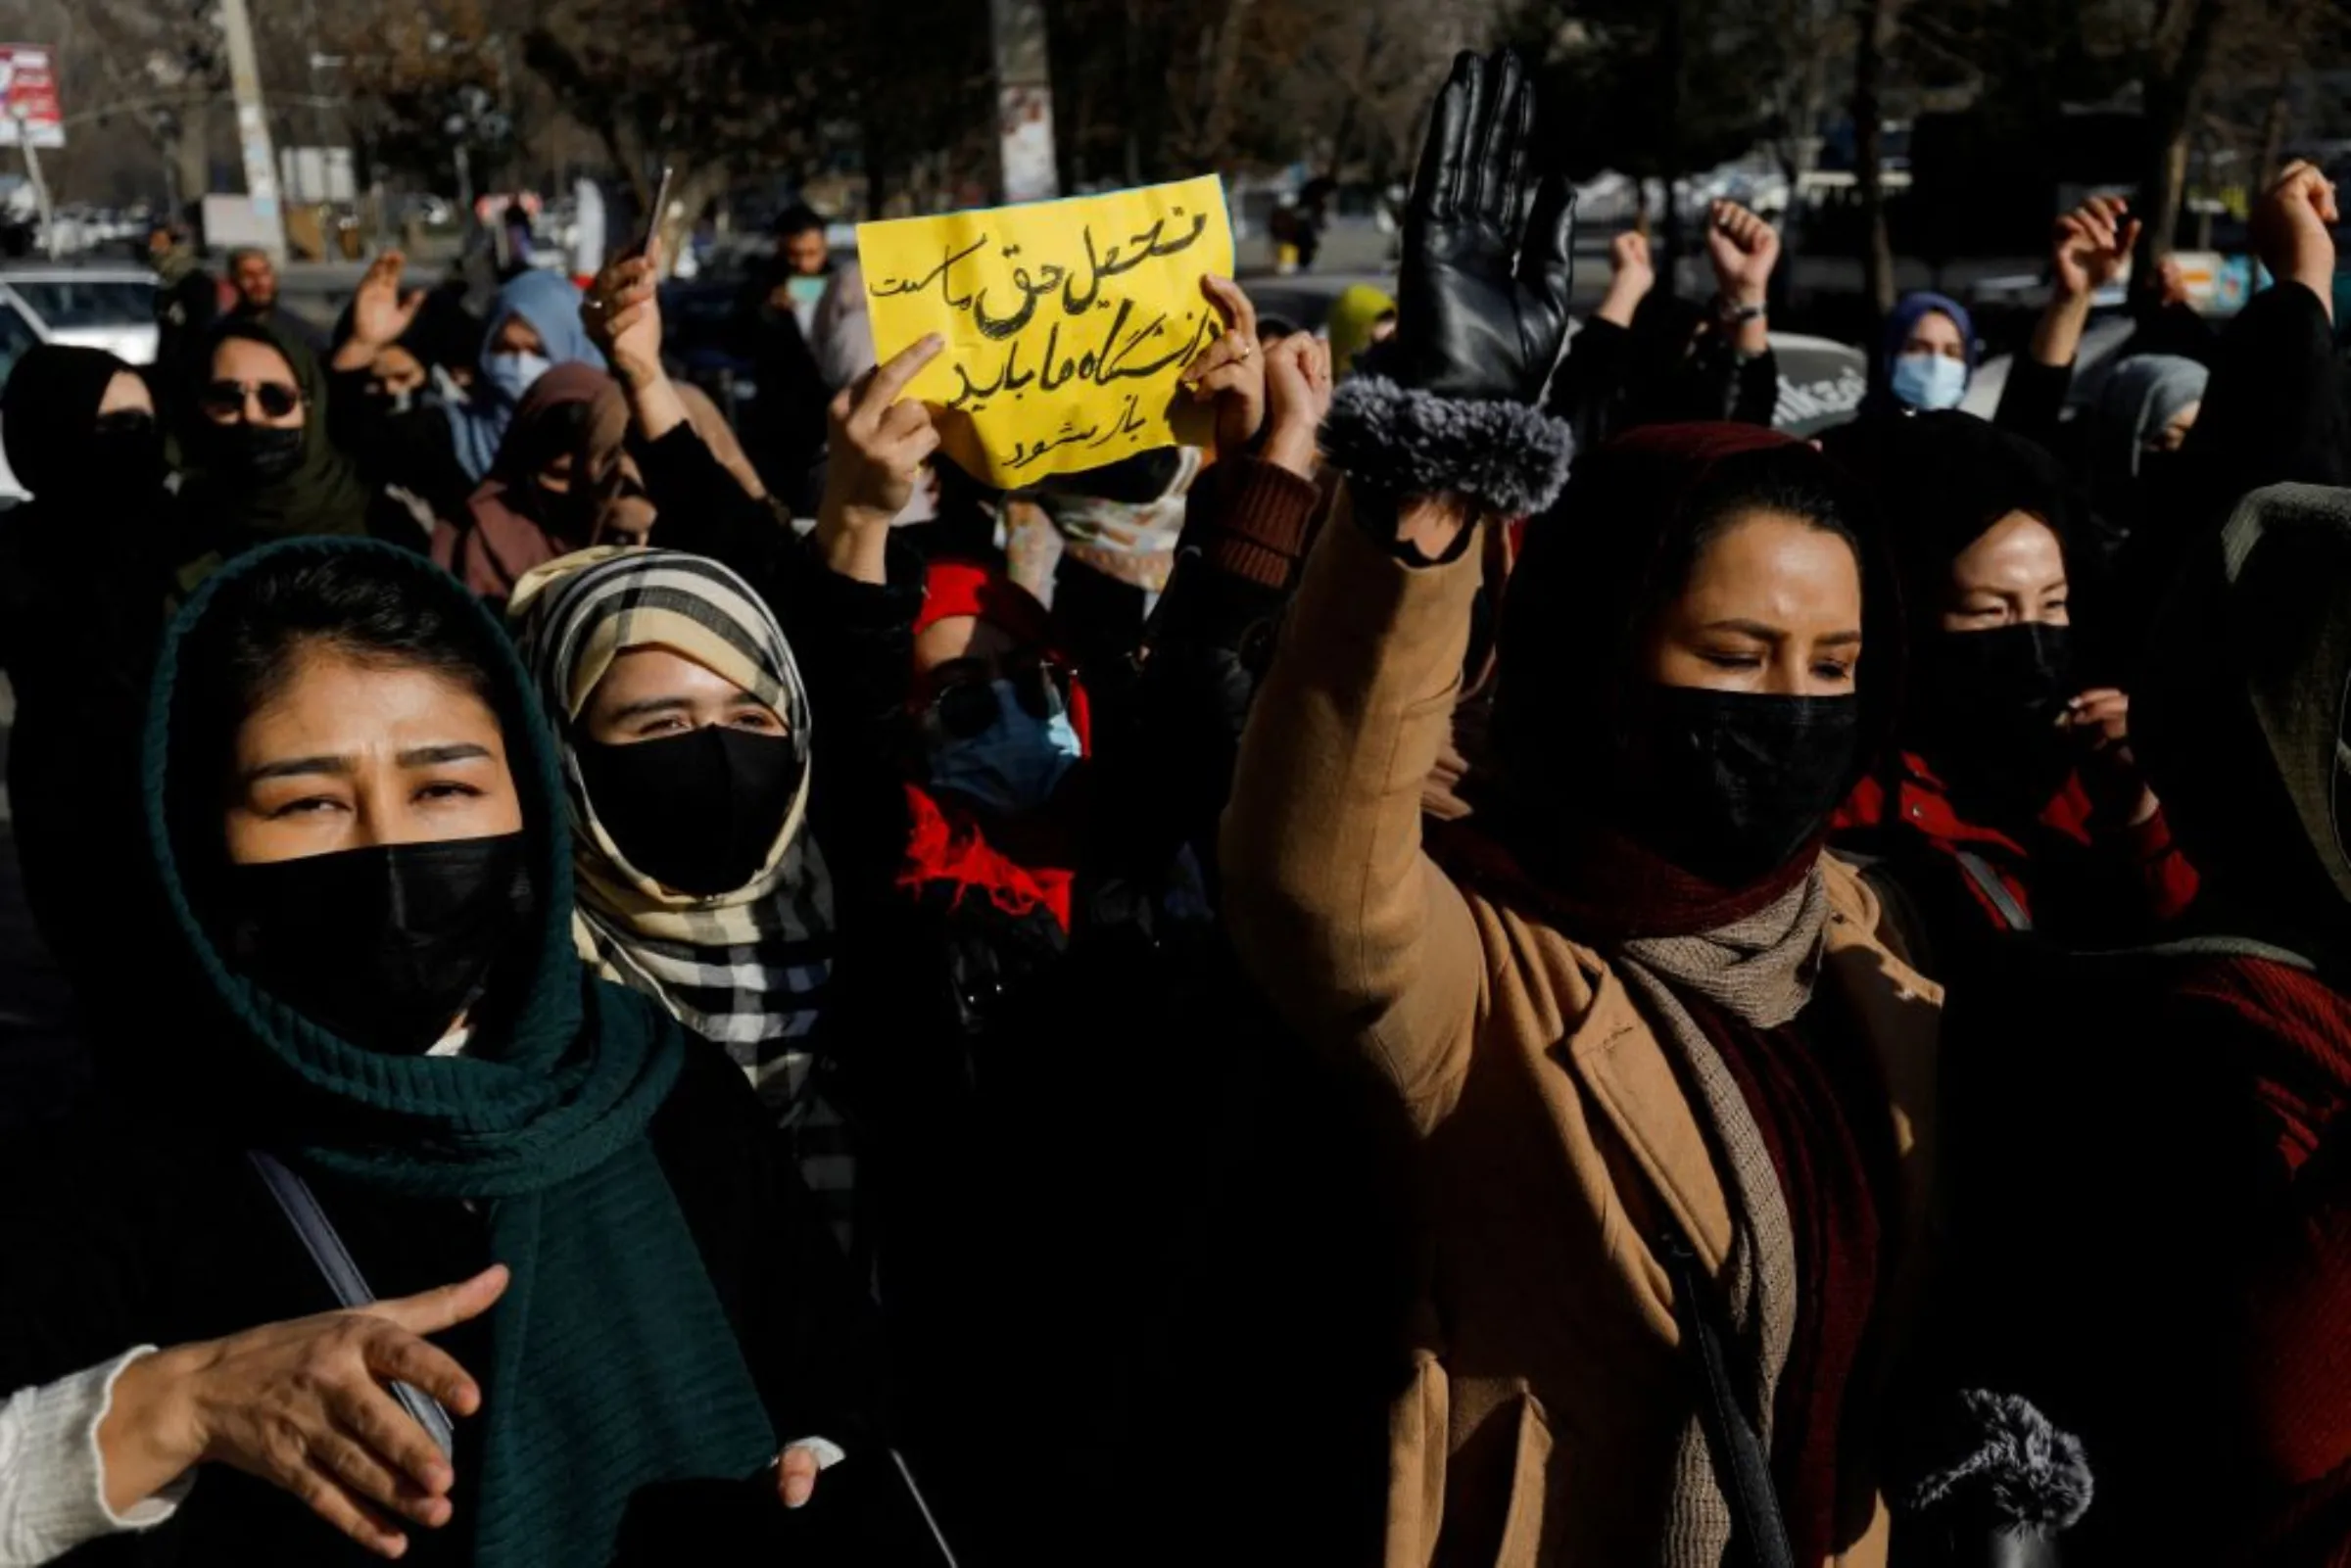 Afghan women chant slogans in protest against the closure of universities to women by the Taliban in Kabul, Afghanistan, December 22, 2022